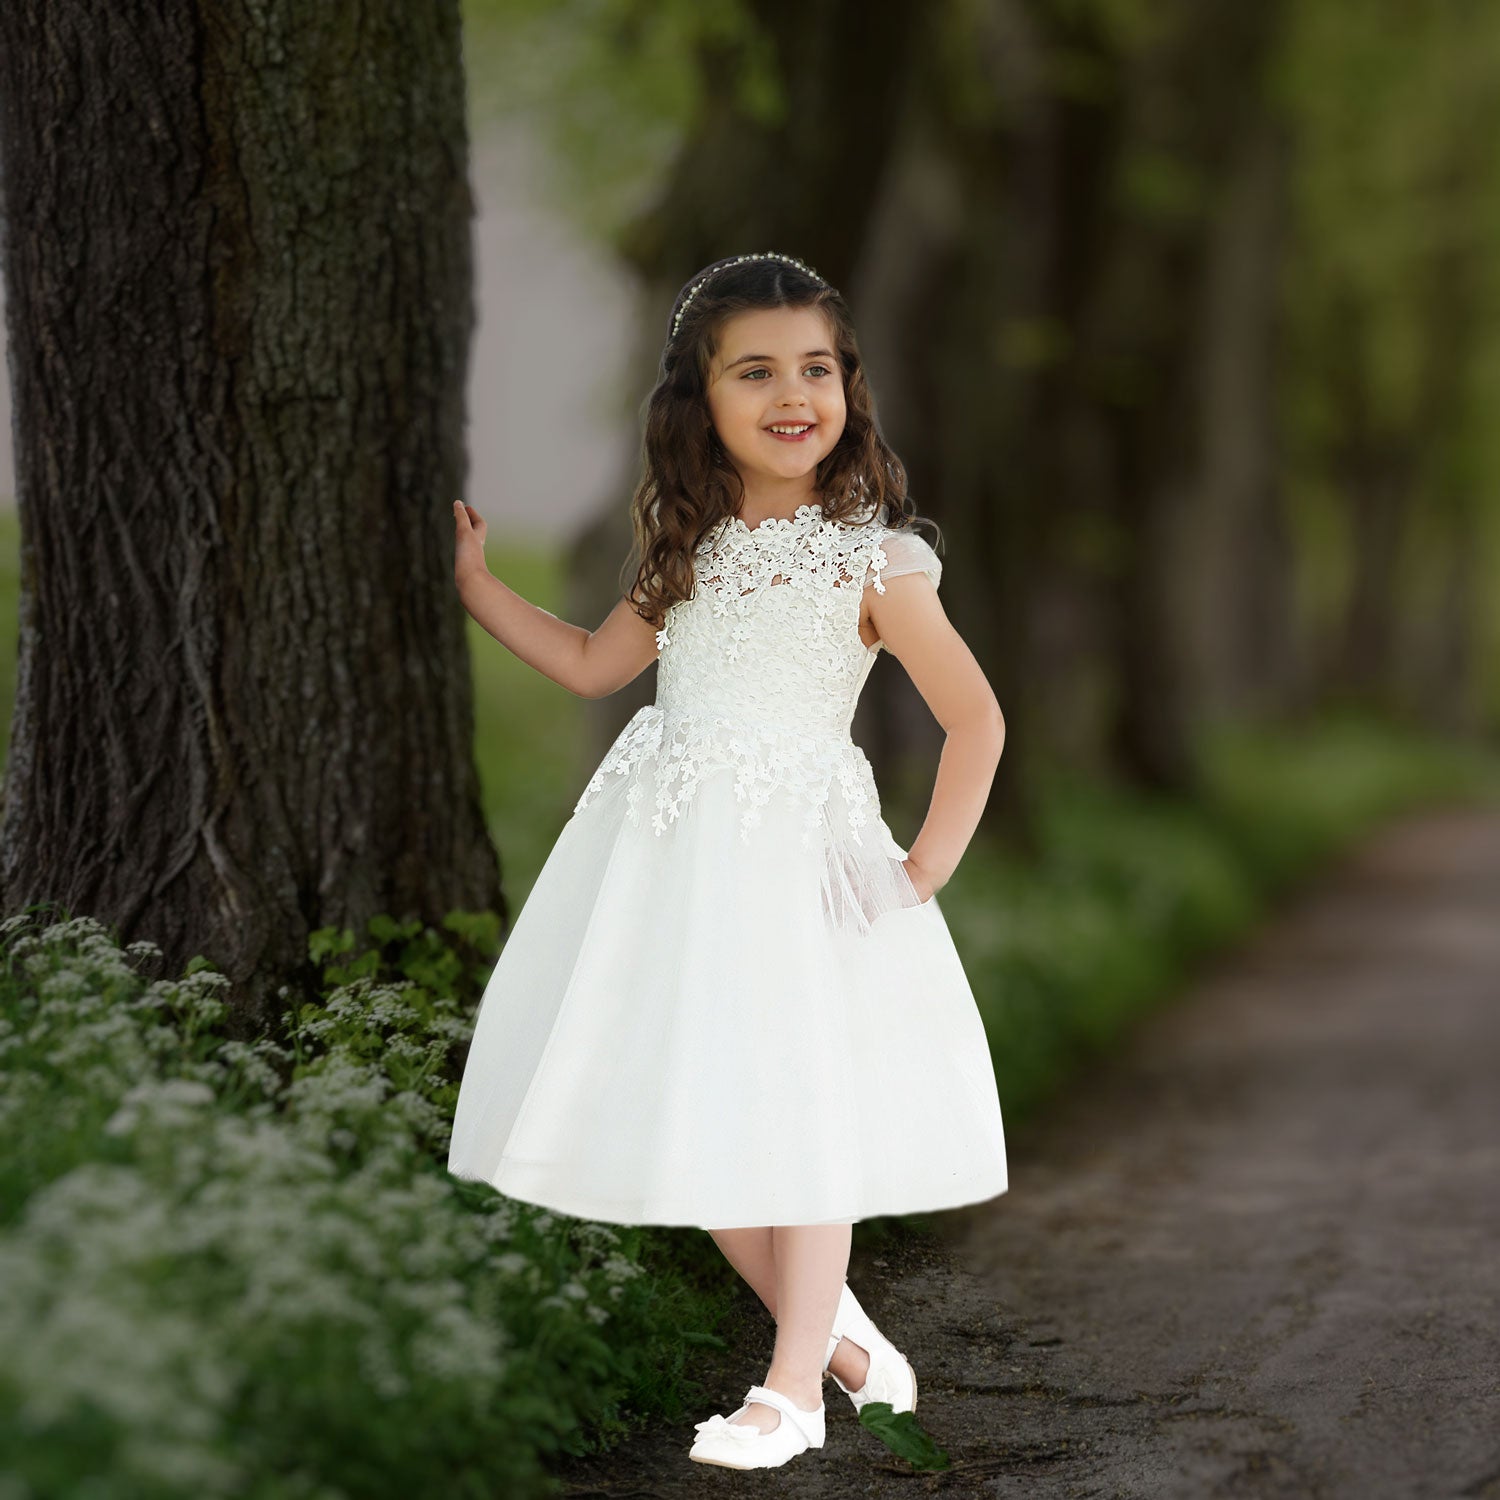 Style Your Little Ones In Comfy Girls Designer Clothes, by Sara Dresses